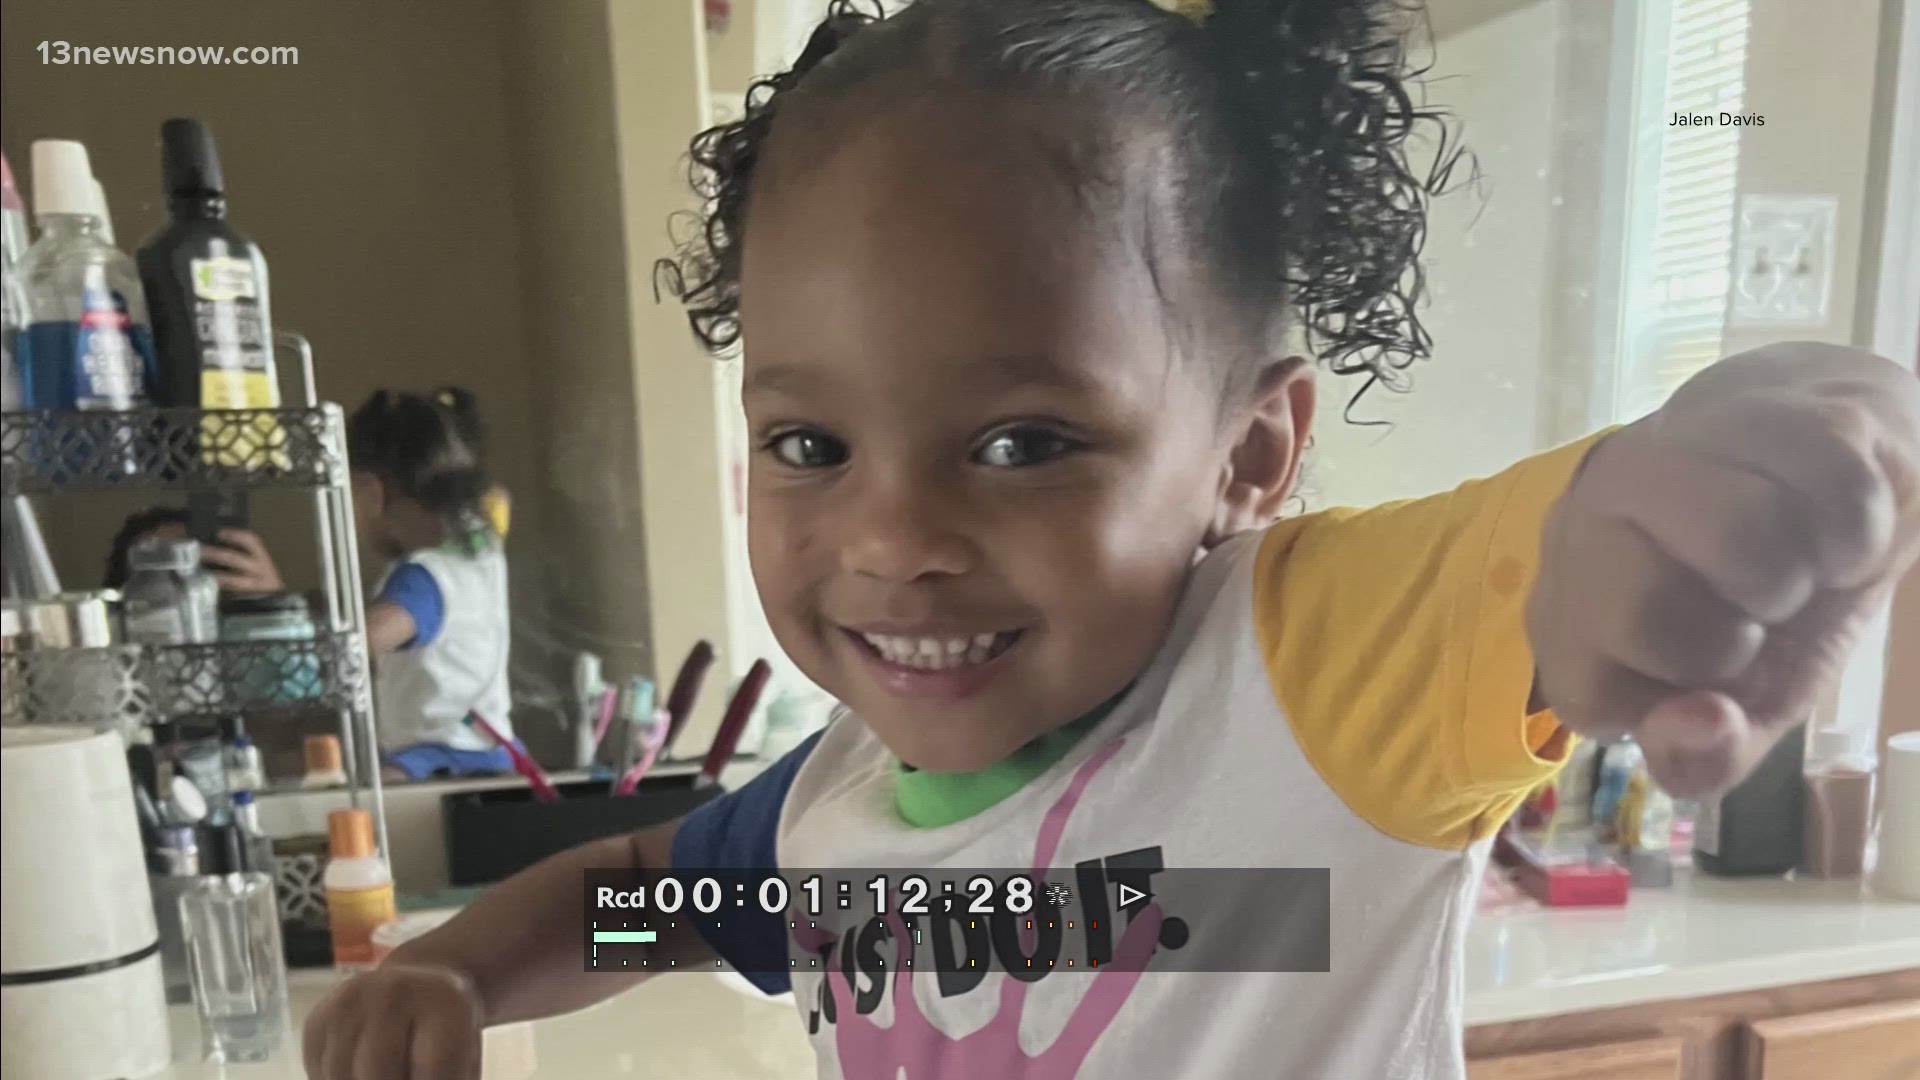 Virginia Beach police say over the weekend they found a car belonging to the girl's mother, Tianna Daniels, but there's no sign of her or the toddler.